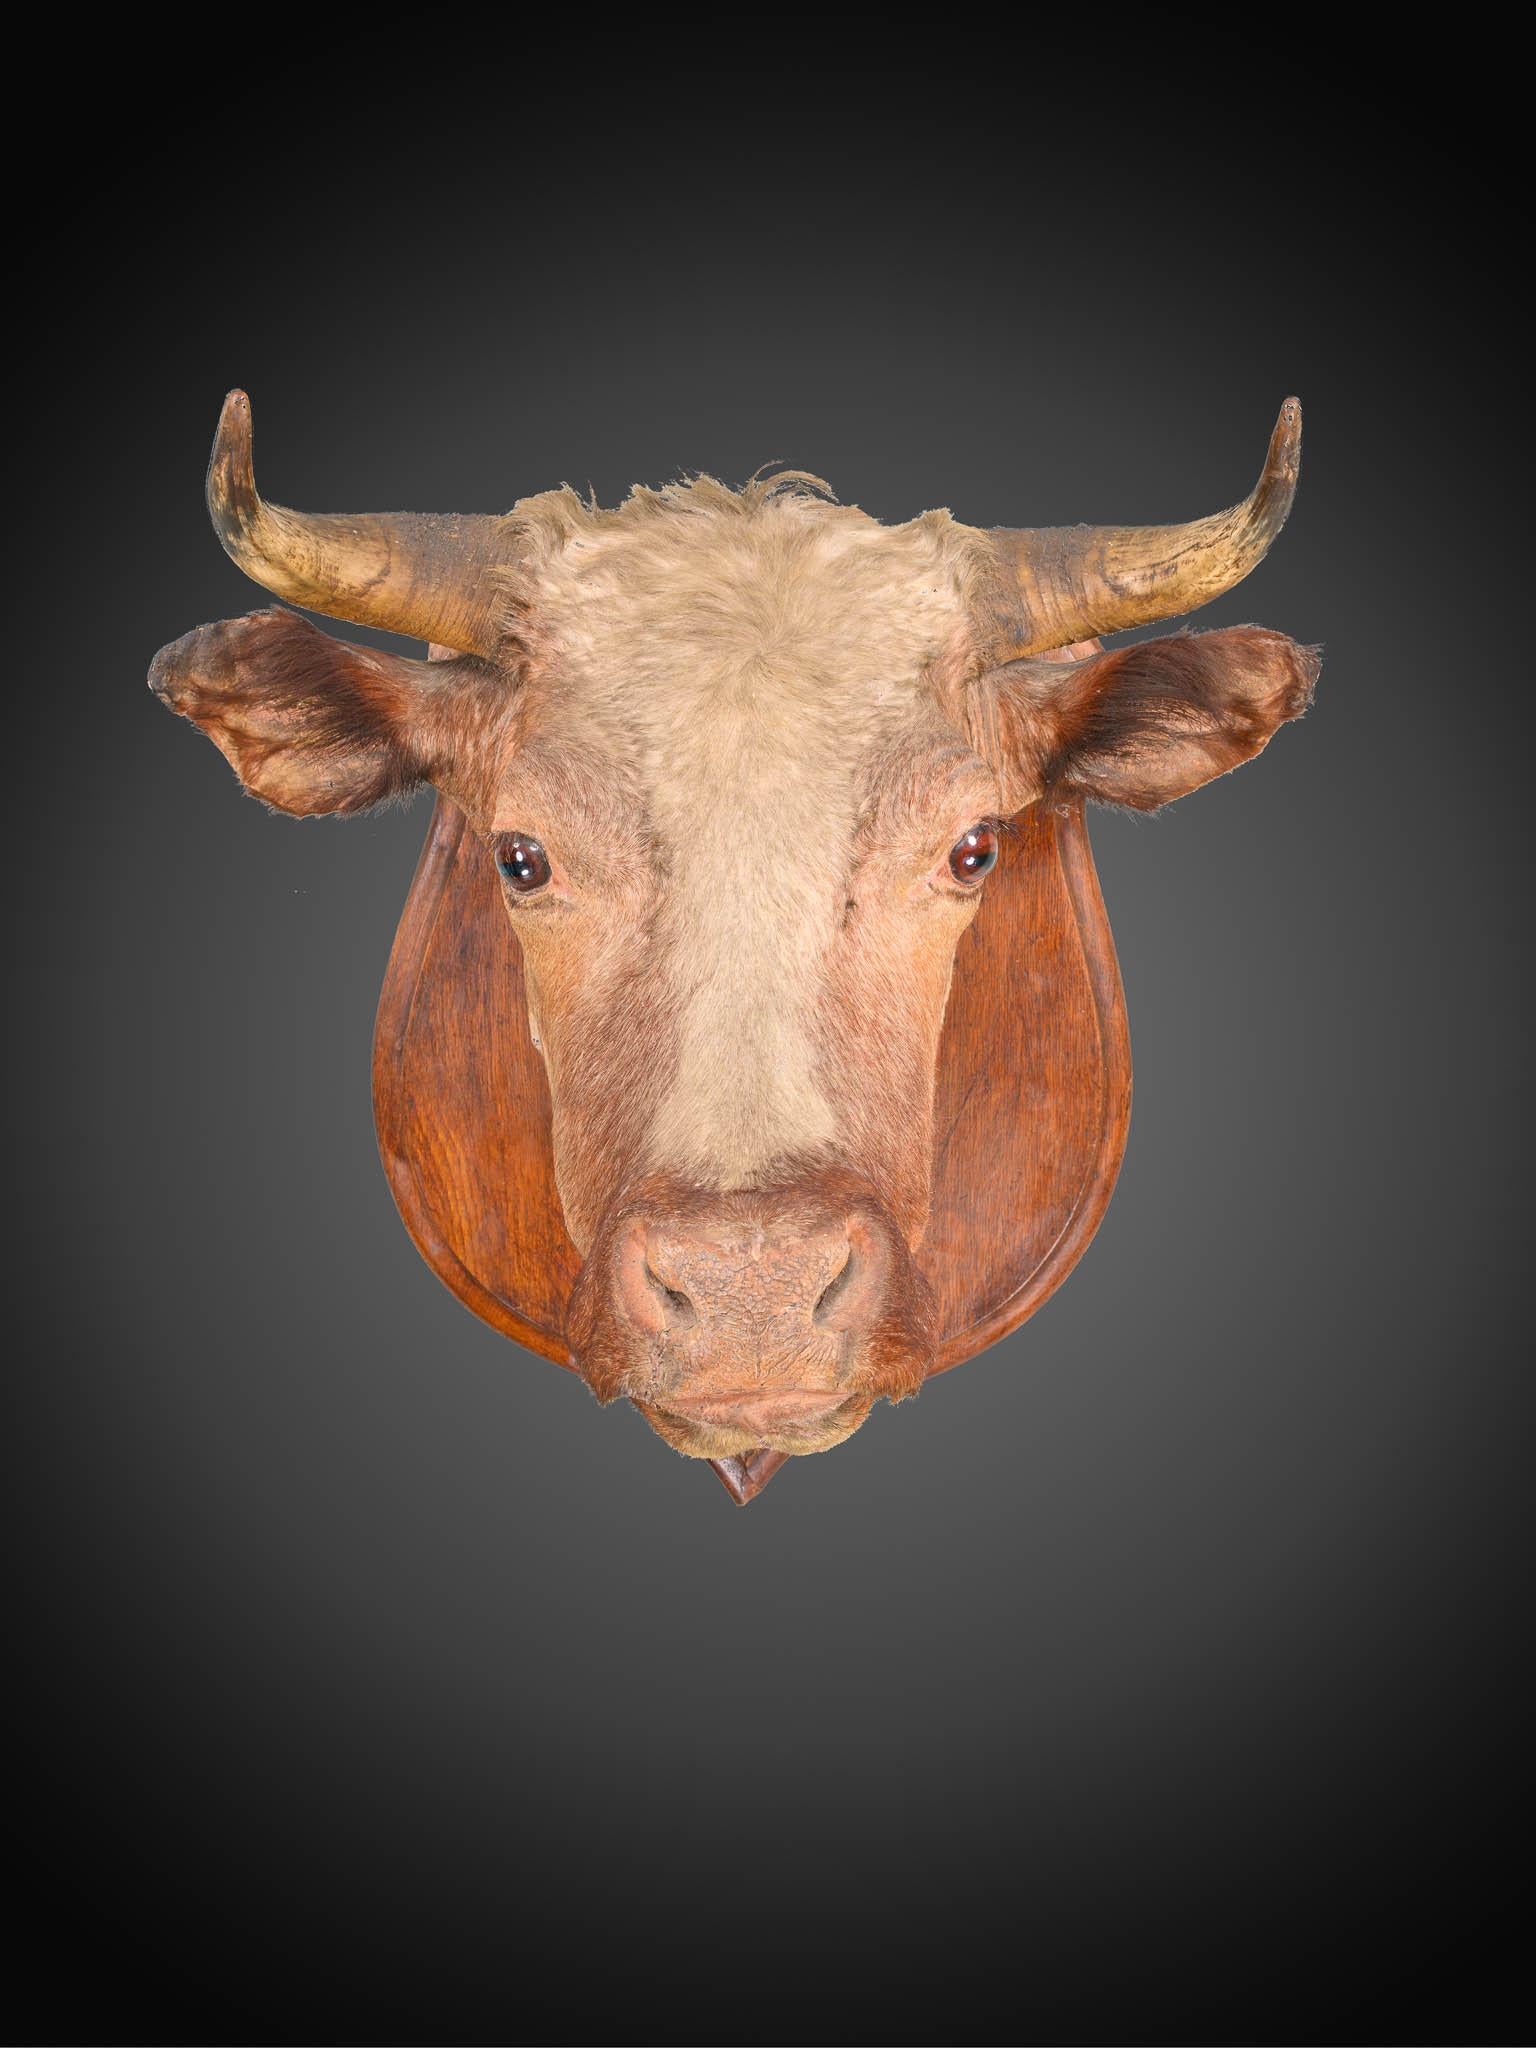 Antique Rowland Ward  late 19th C Victorian lifesize bull’s head taxidermy with glass eyes on  beautiful oak shield 

Rowland Ward paper label to the back of the shield.

Provenance: The Richard Pratley Collection